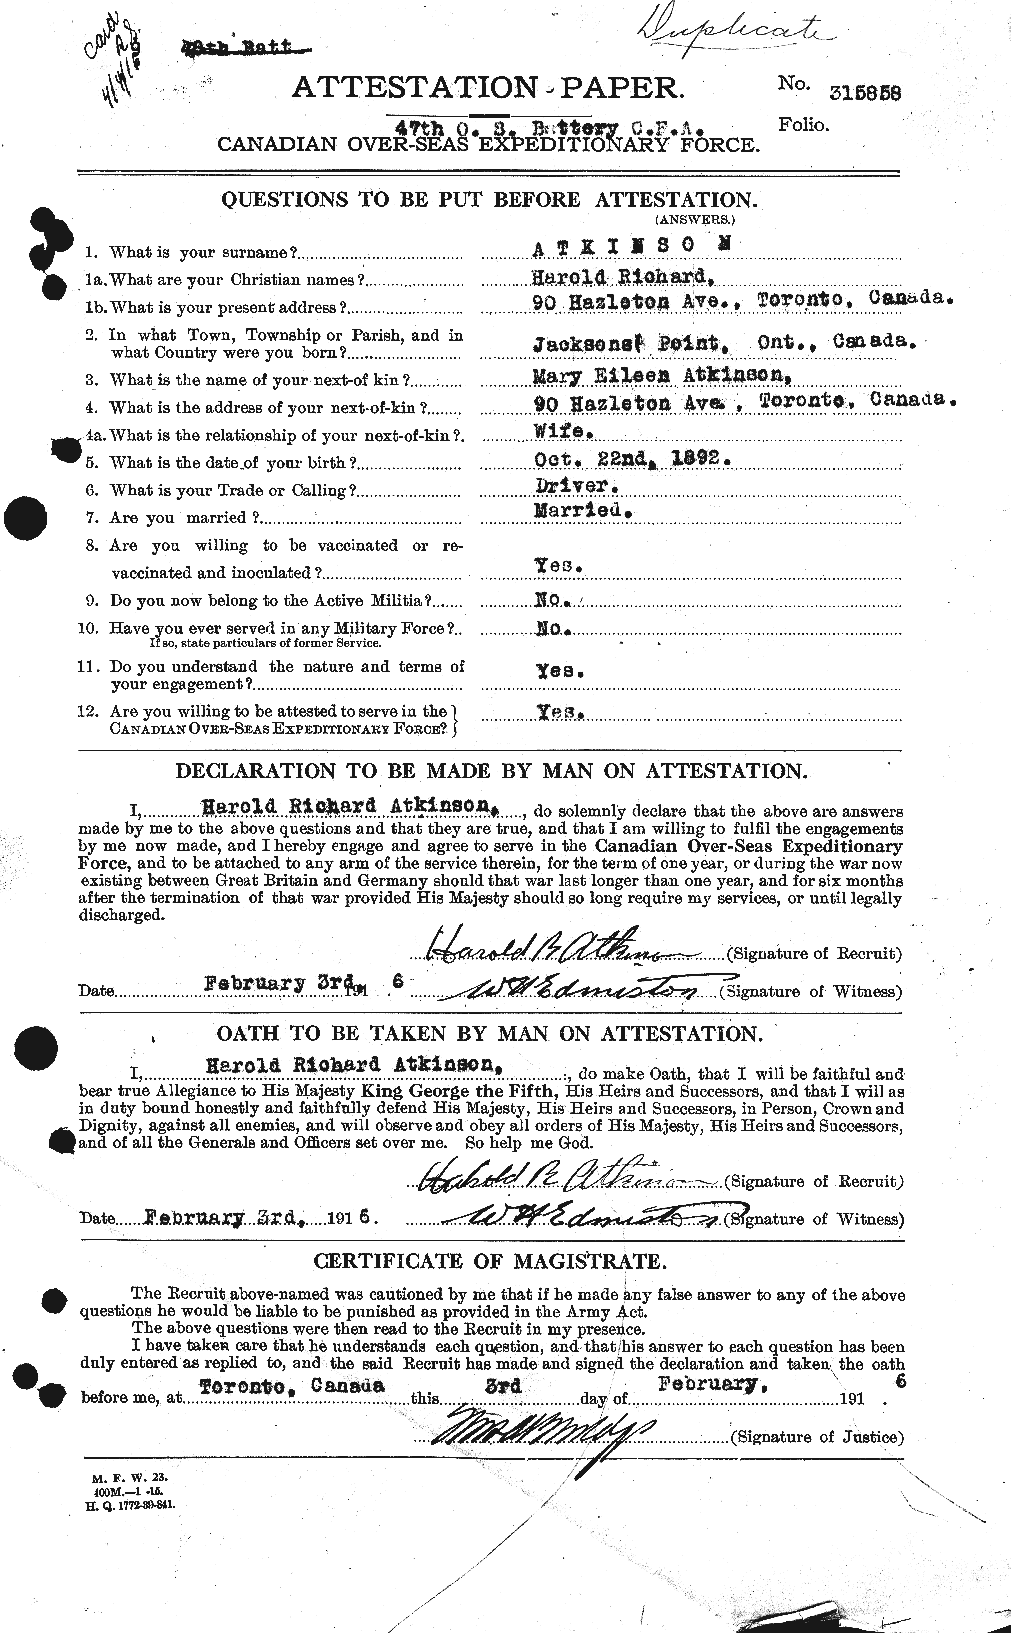 Personnel Records of the First World War - CEF 217385a